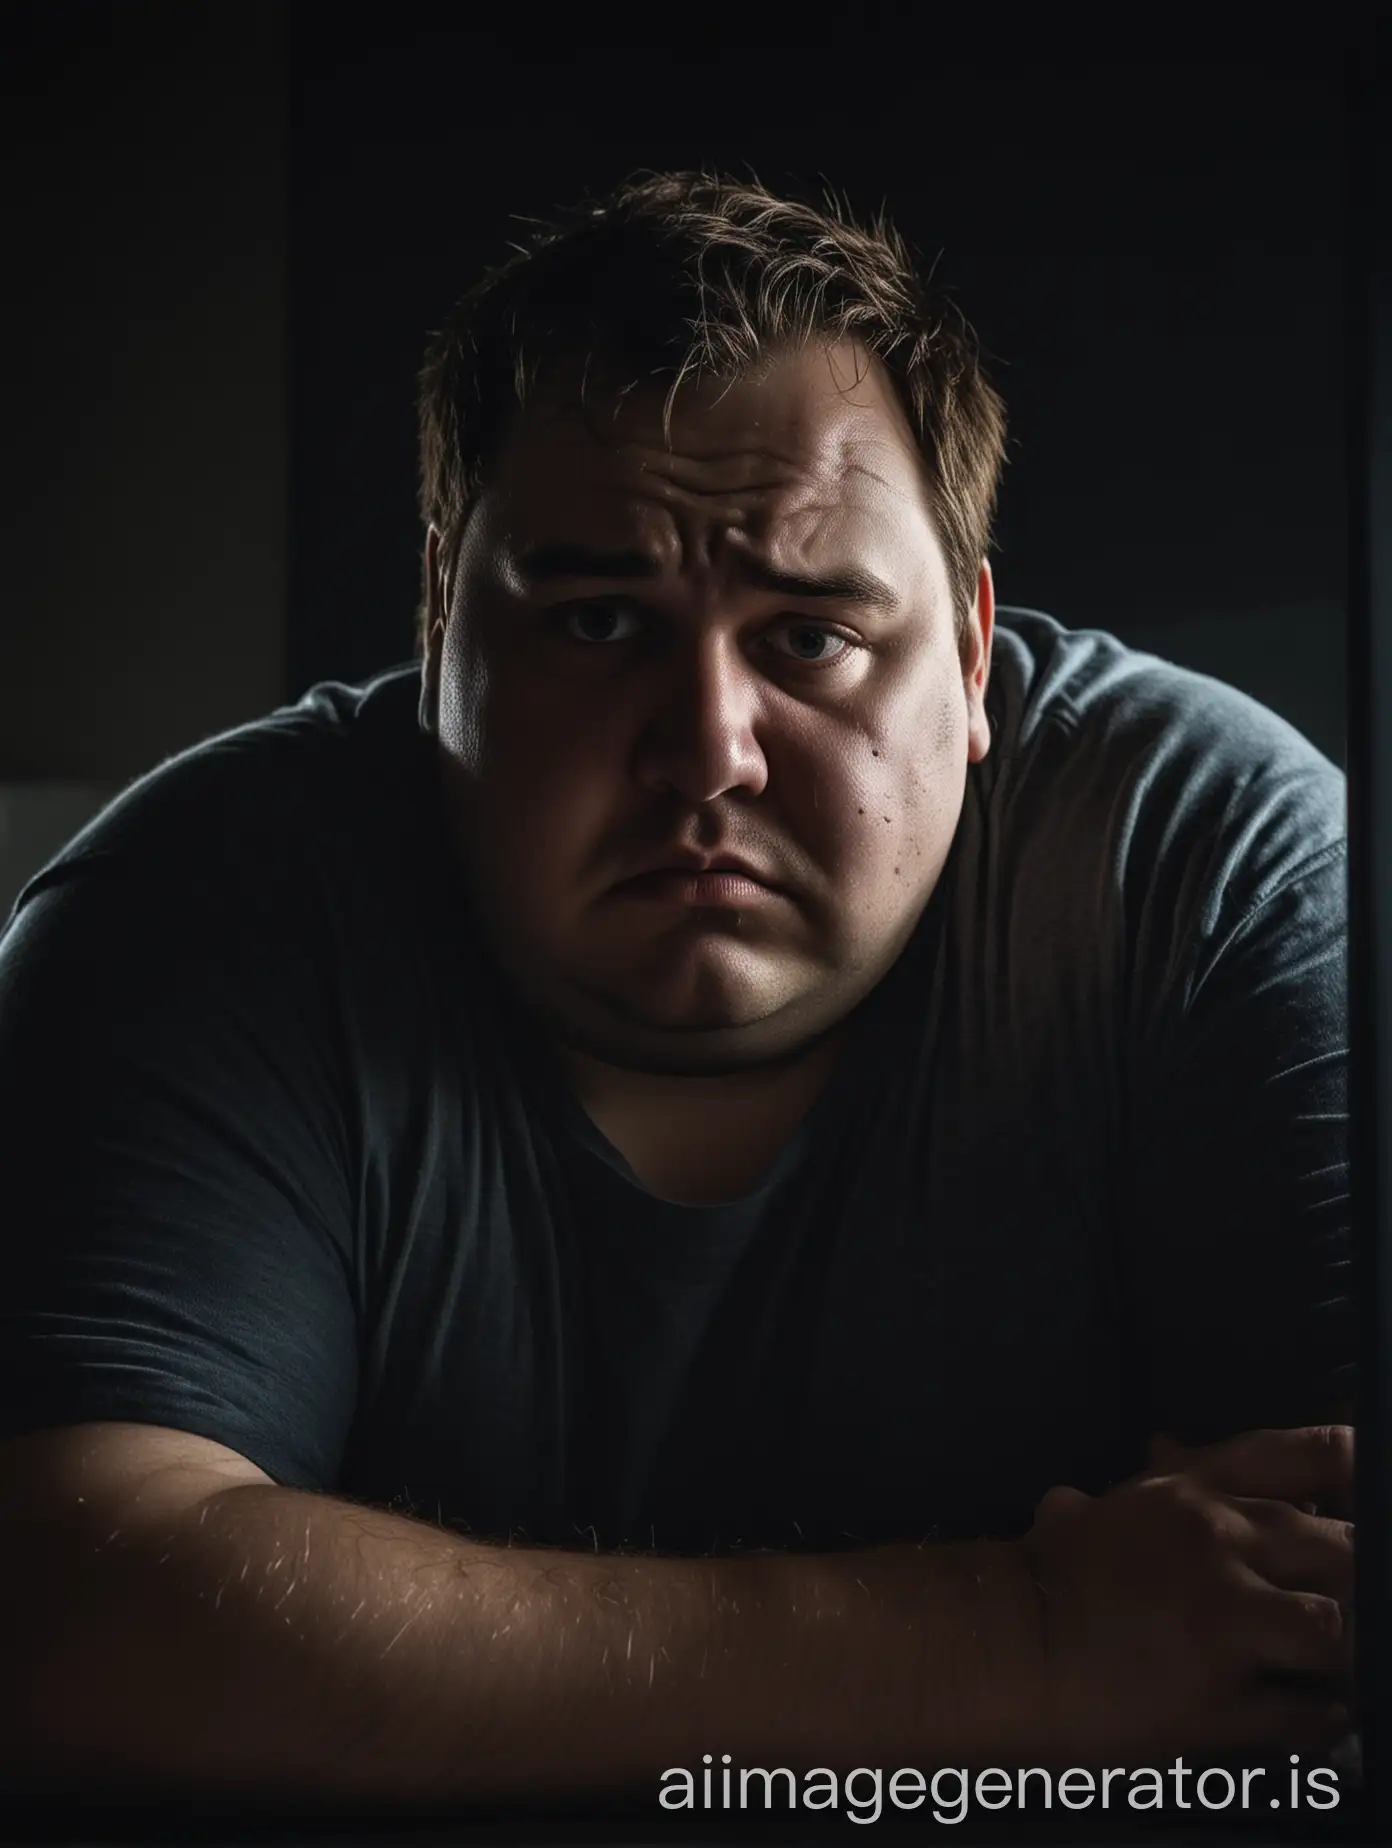 A fat man sitting in front of a computer screen. The room is dark. The screen illuminates the face of the man. The man looks sad, desperate and lonely. The picture shows his face up close.
